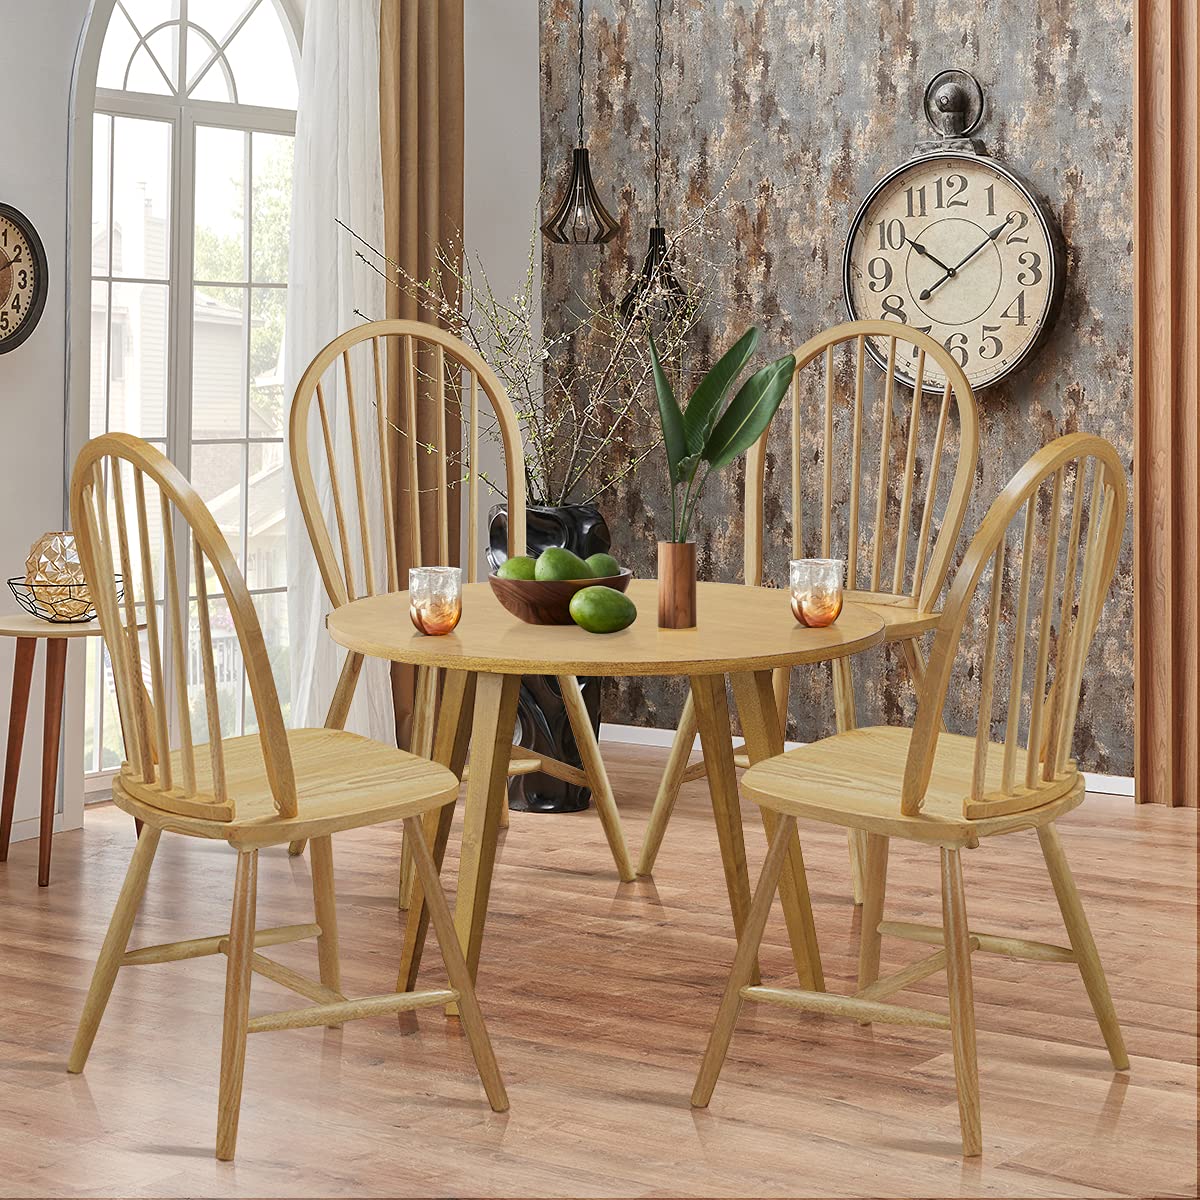 Giantex Wood Dining Chairs, French Country Armless Spindle Back Dining Chairs